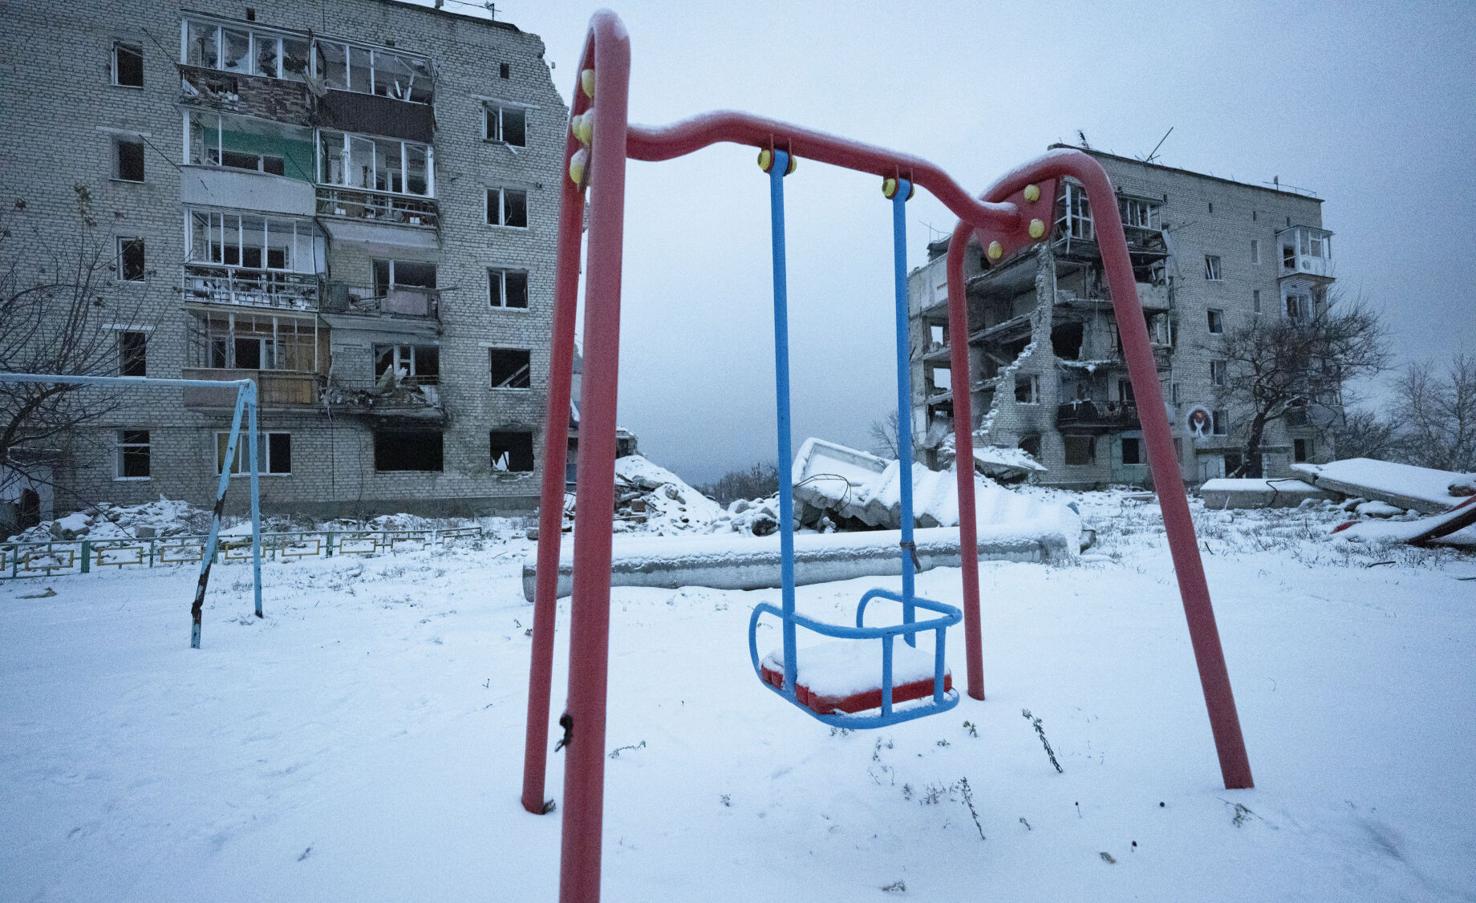 A swing lies silent outside a destroyed apartment complex in Izyum, Ukraine, Thursday, Dec. 14, 2023. On March 4, 2022, Russian air attacks killed 44 or more civilians. Ukraine forces liberated the city in Sept. 2022 and afterward local police discovered a mass grave of 440 bodies in the town. The city administration estimates that all in all, about 1,000 people lost their lives under the Russian occupation. (The Gazette, Christian Murdock)